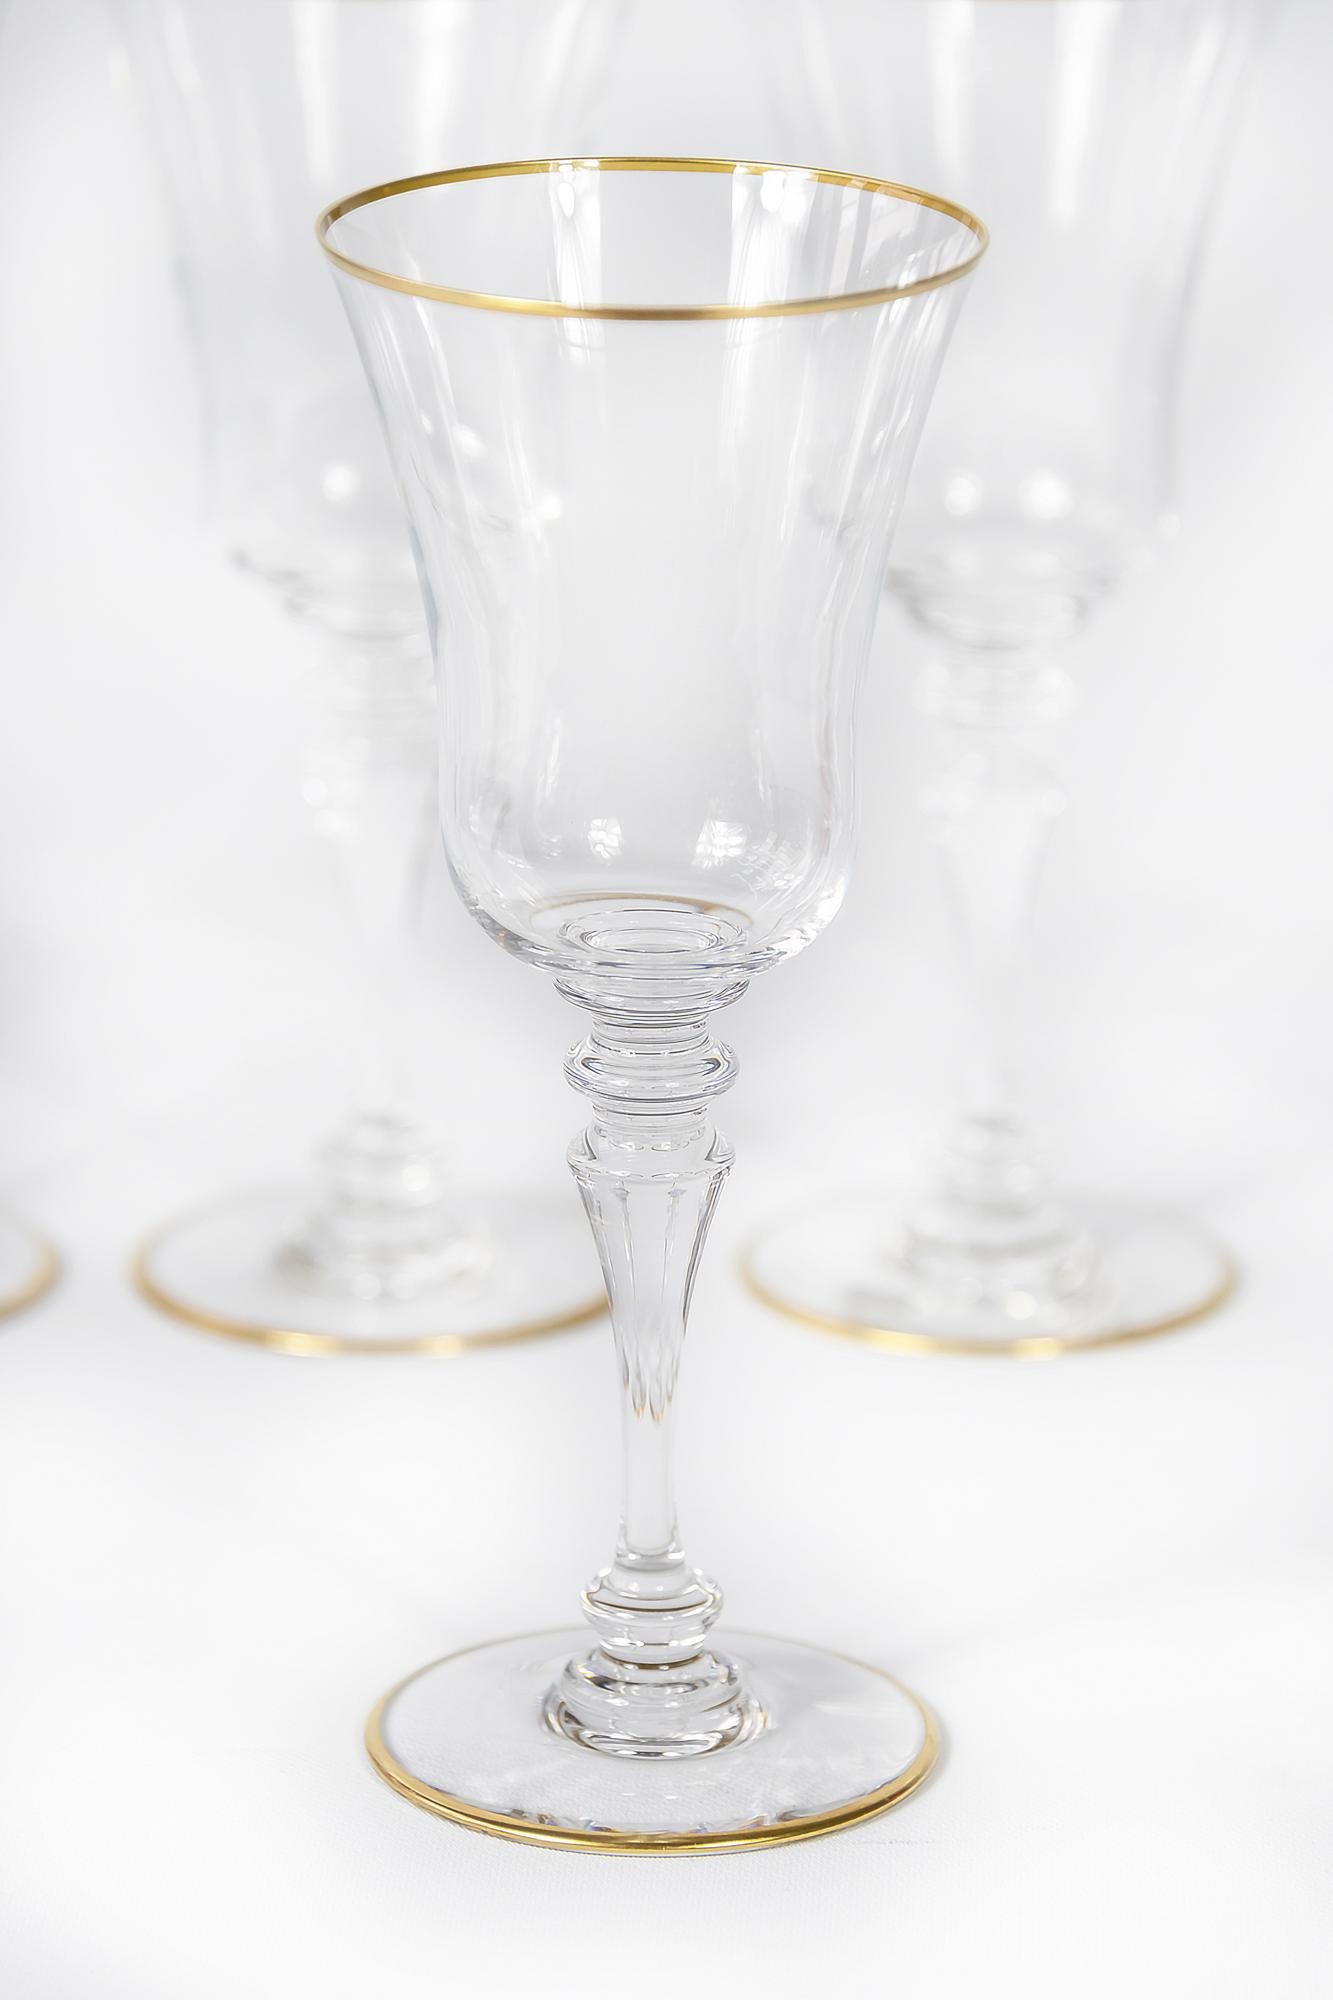 Set of 45 Baccarat crystal glasses with gold trim details.
12 pcs. champagne flute glasses (H 22 x 6 cm)
11 pcs. red wine glasses
10 pcs. white wine glasses
12 pcs. wine glasses
Marked on the bottom, several with labels.
Excellent condition.

 